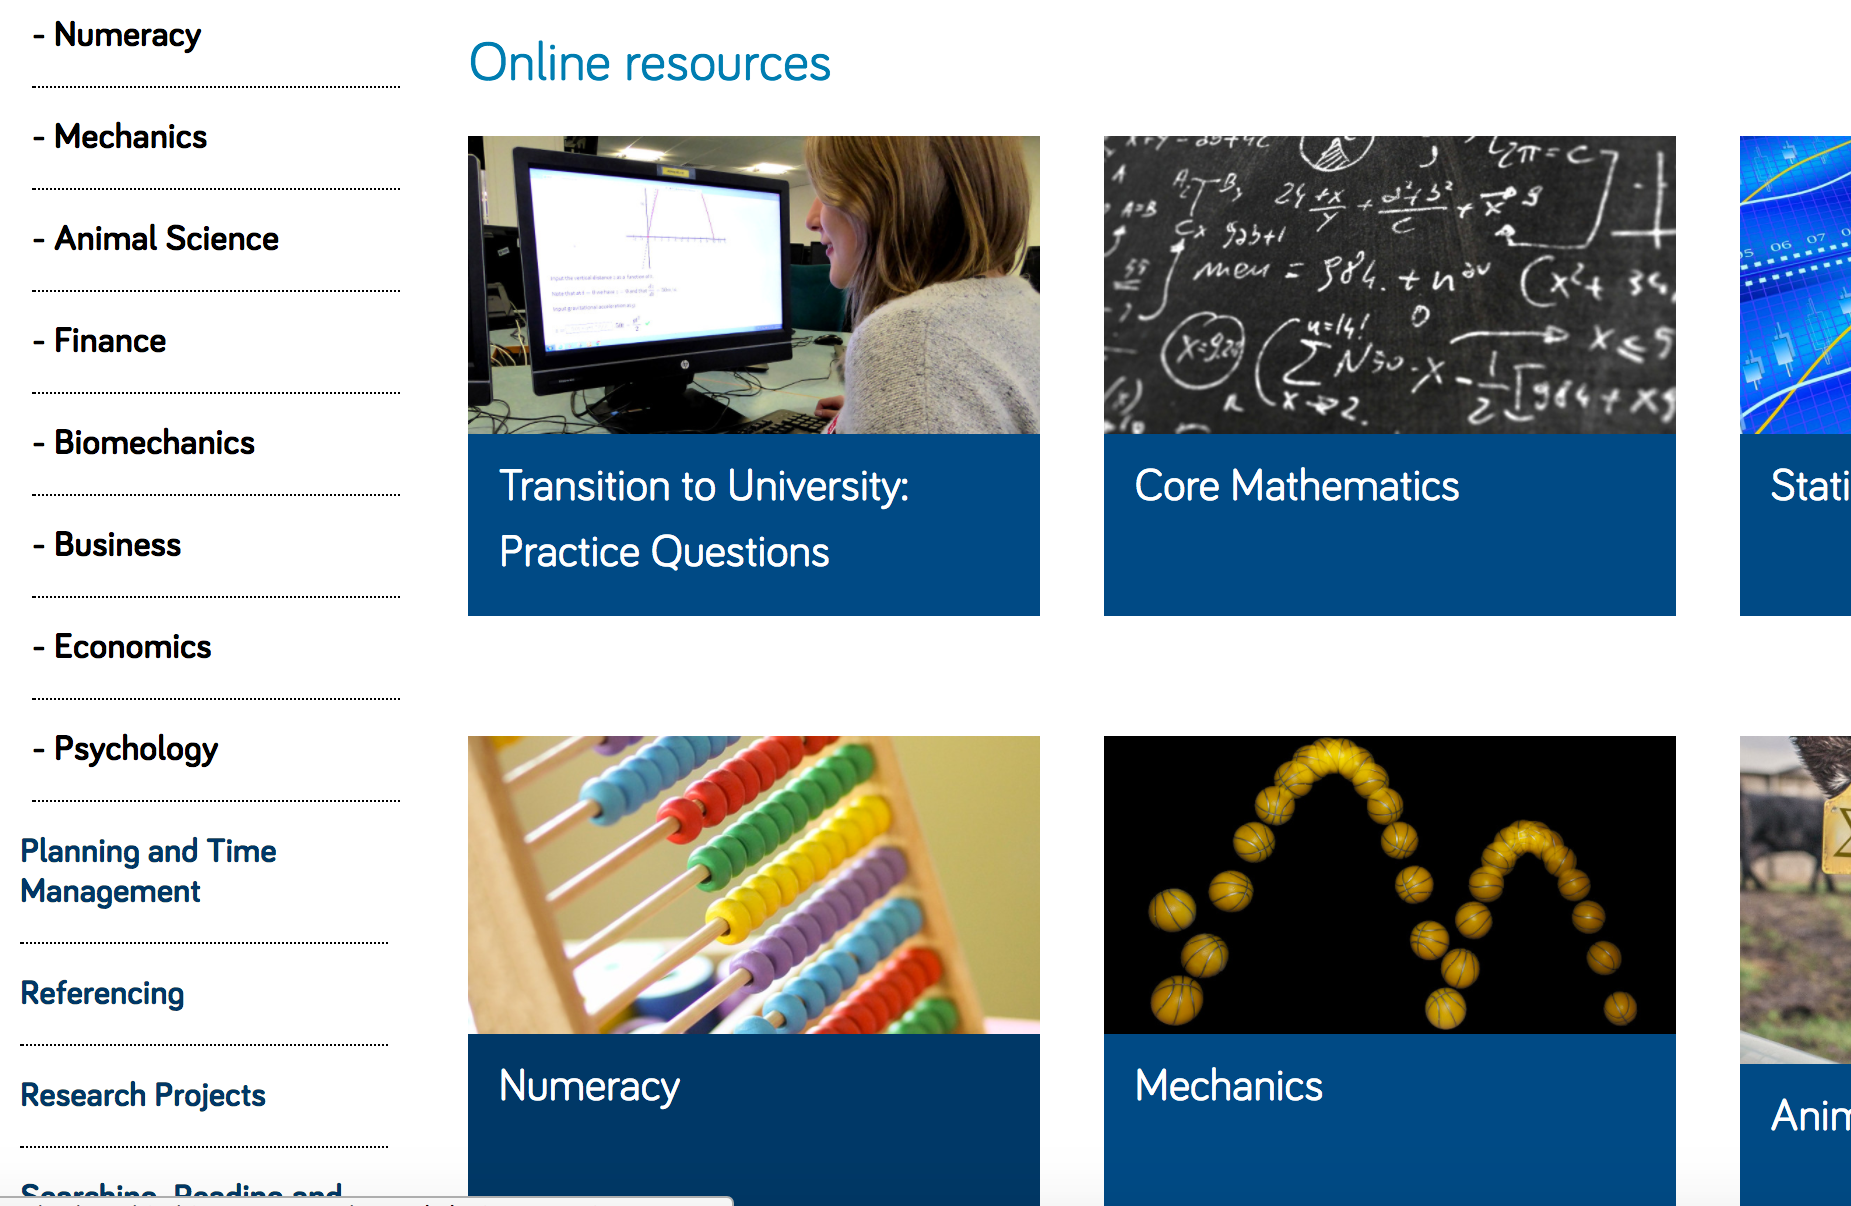 A full list of topics can be found on the ASK website one of the places where we are making the material available to students